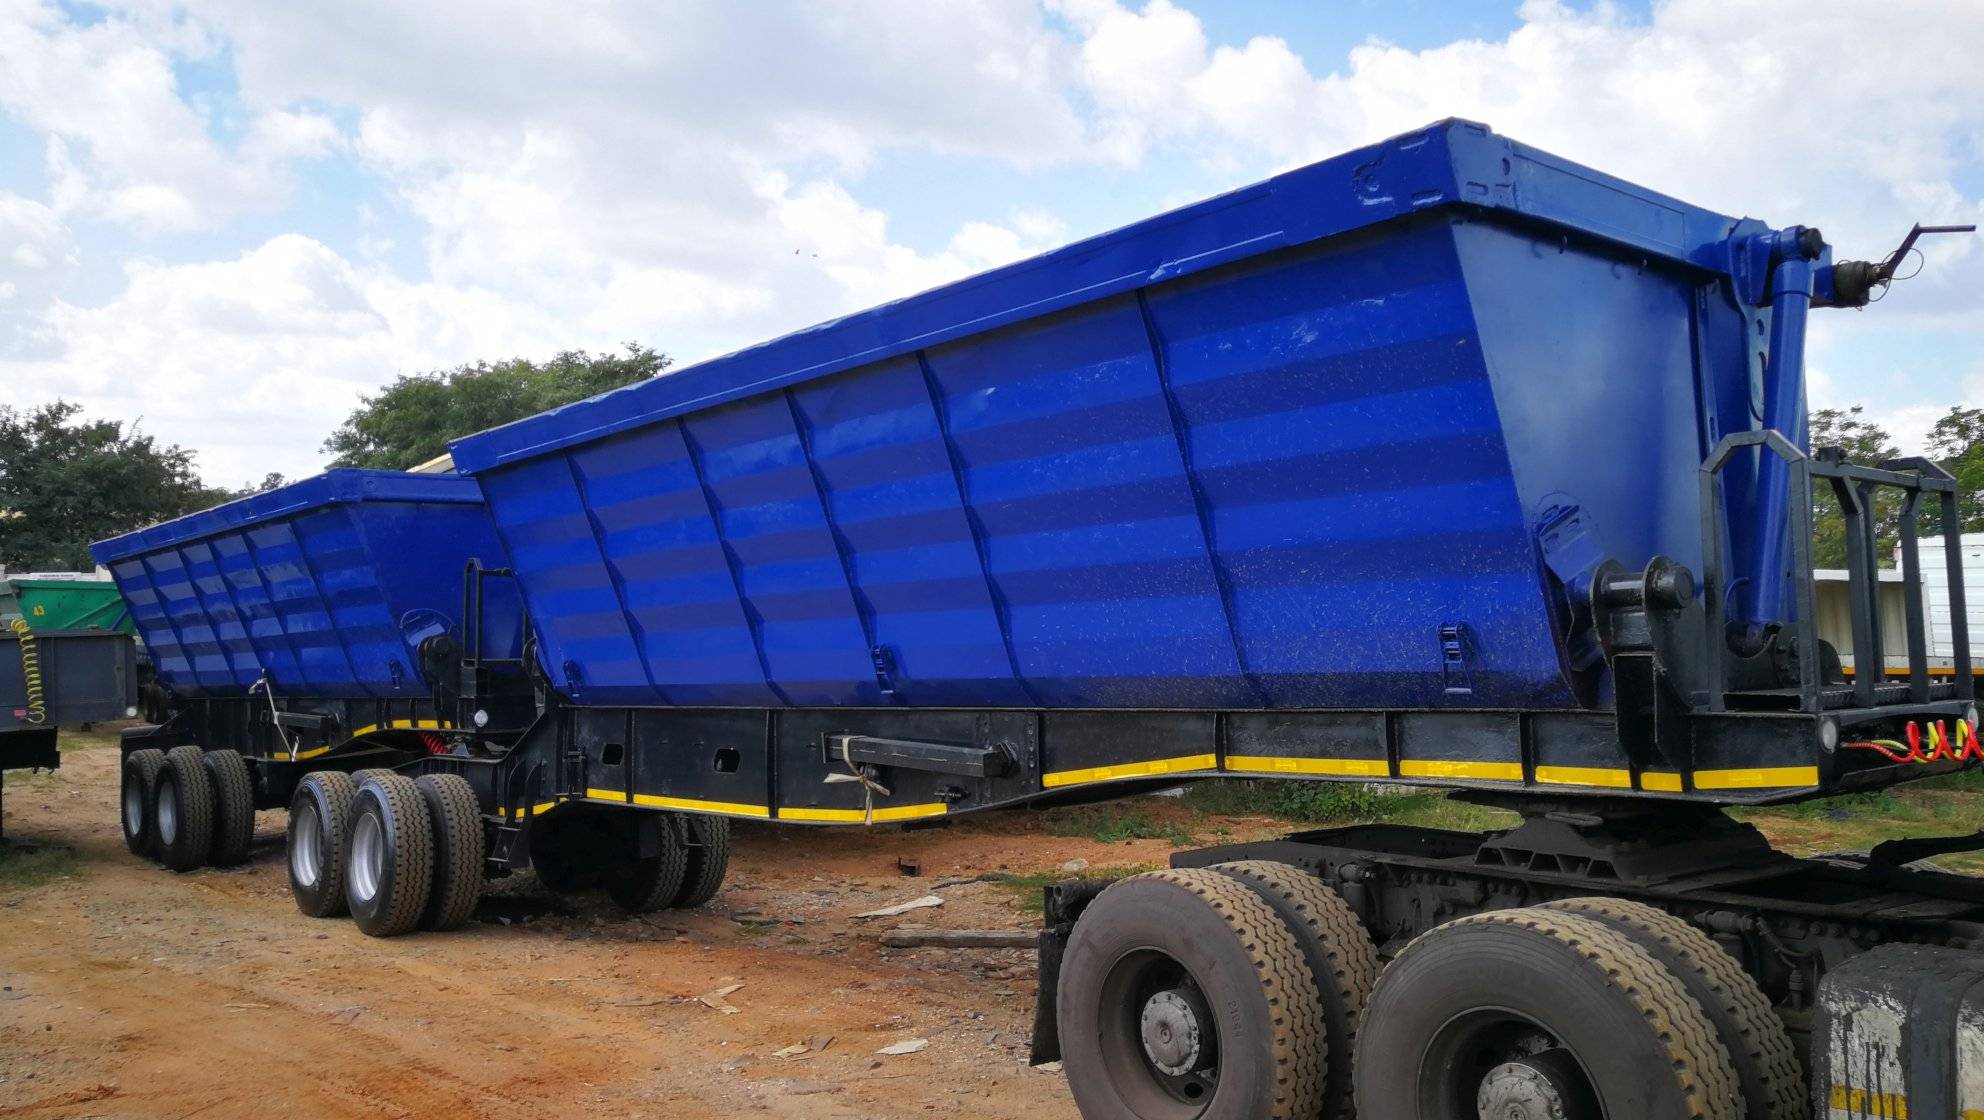 Start Your Own Trucking Business, 34 Ton Side Tippers, Become A Trucker, New Truckers Welcome, Eastern Cape Province, South Africa